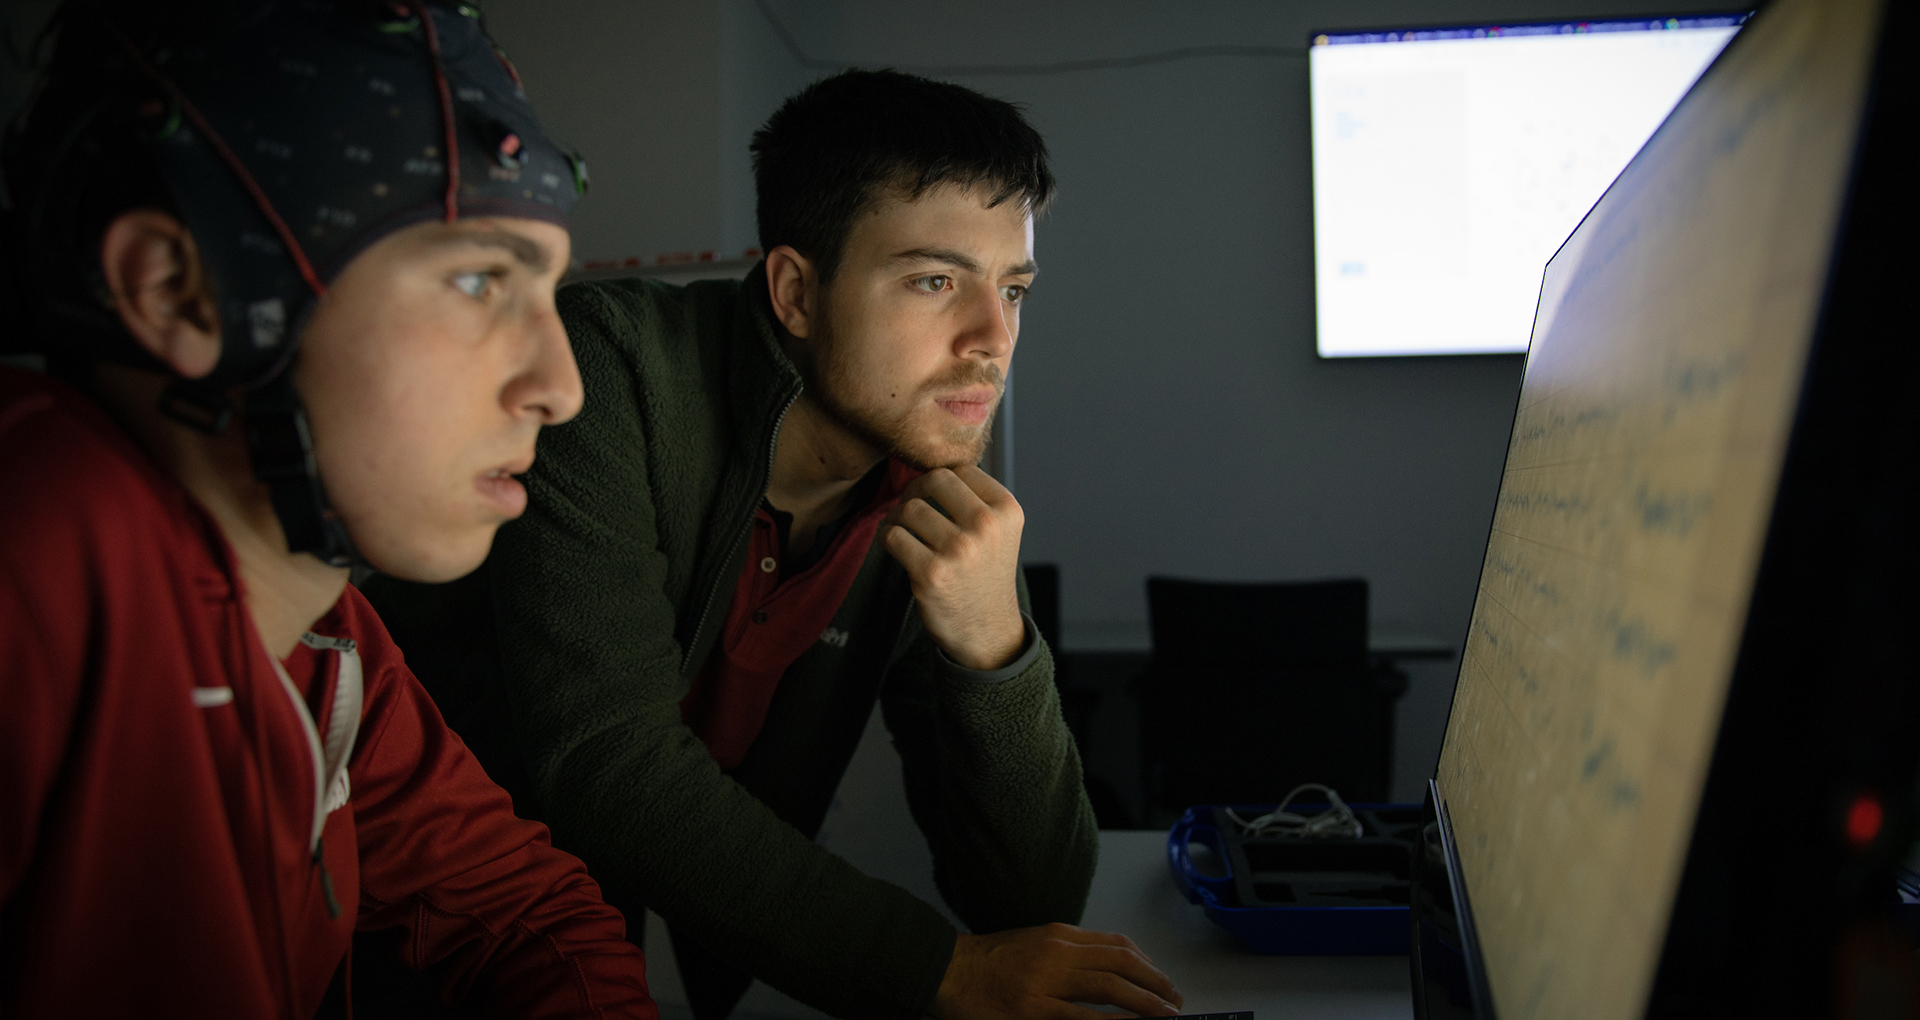 Students look at a computer screen with one wearing a monitering device on his head.